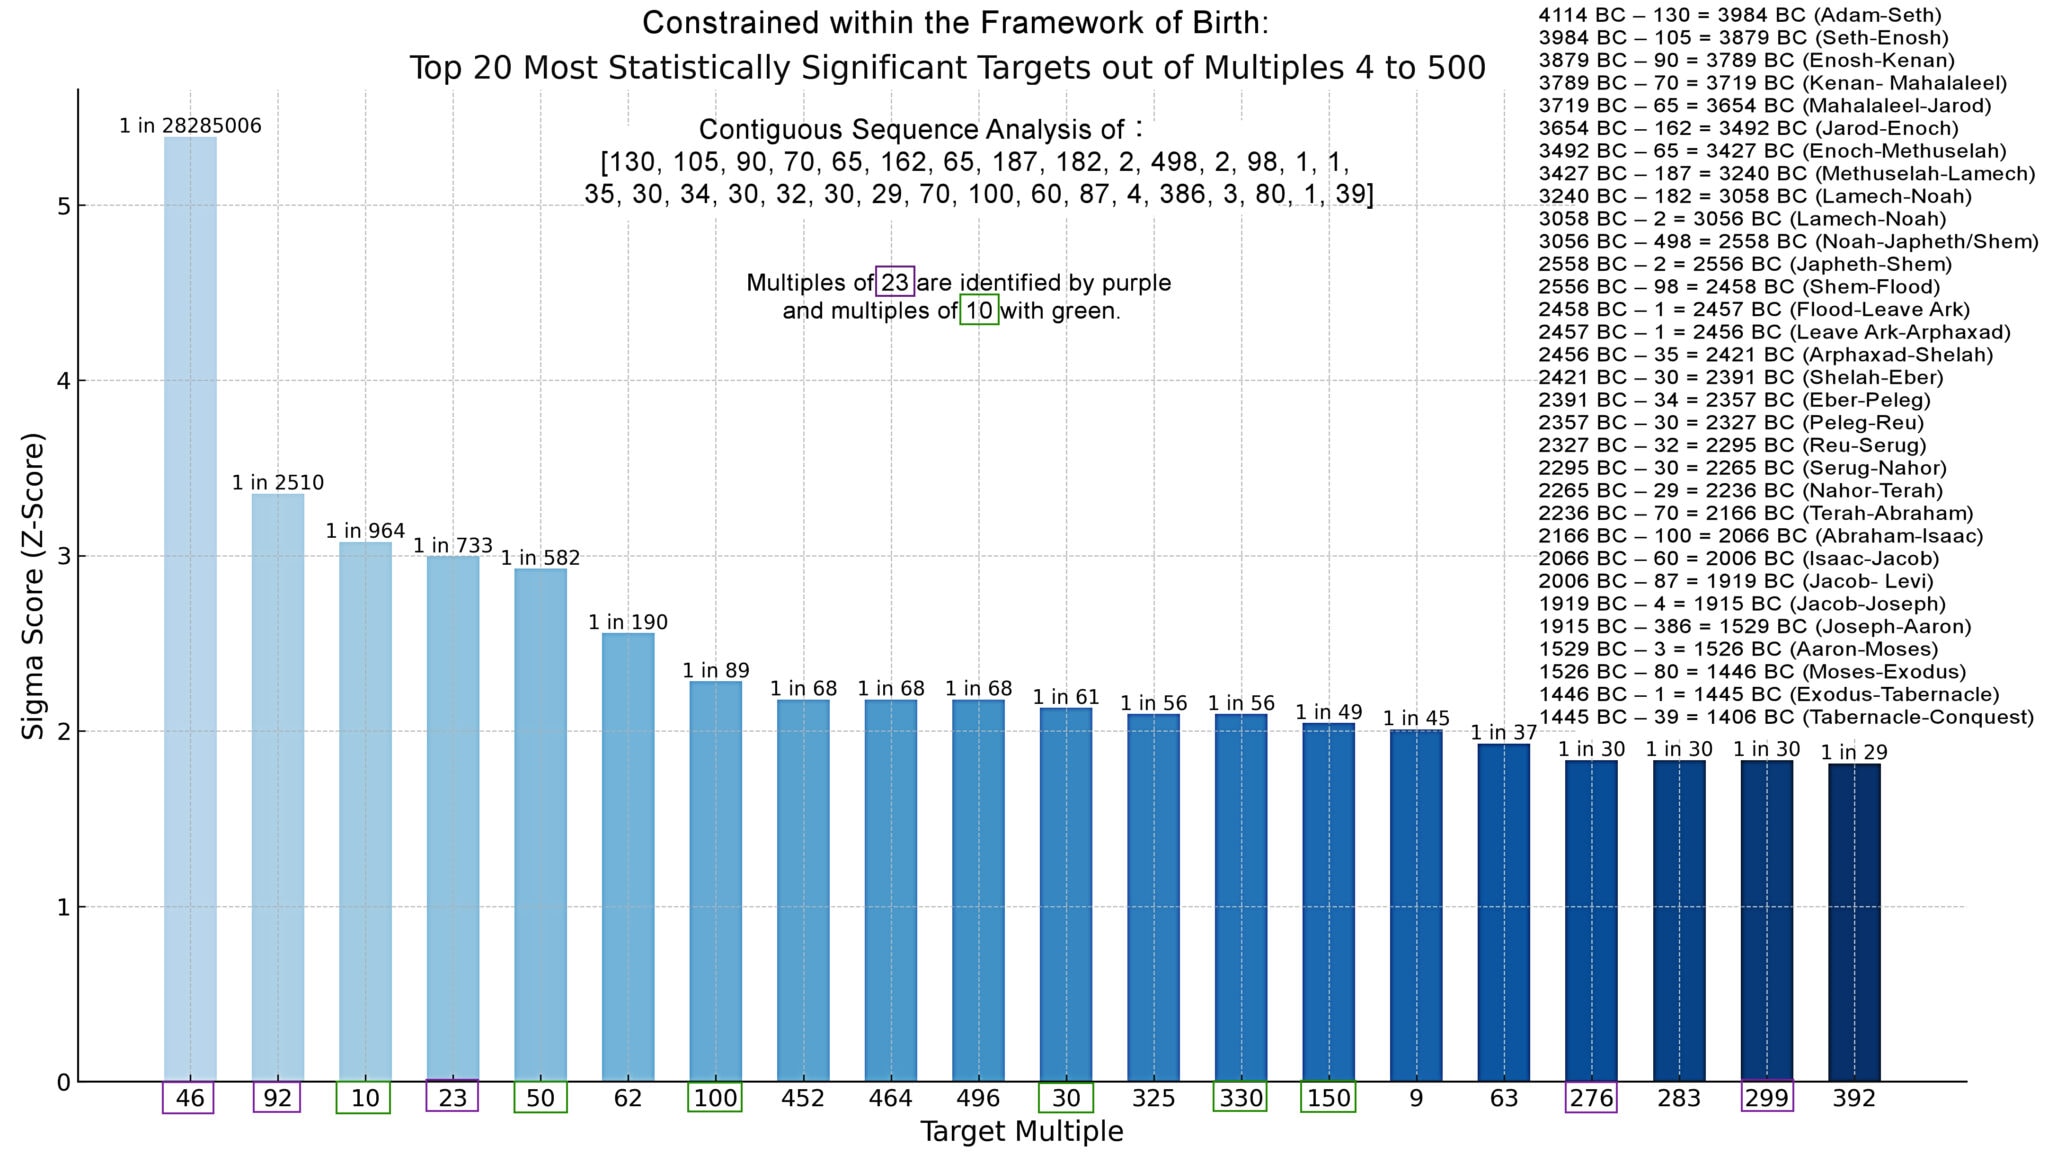 Top 20 multiples of all targets between 4 and 500. This detailed probability analysis using GPT-4 is tailored explicitly for this study and rigorously verified. For comprehensive details on the analysis methodology and statistical approaches, refer to the introductory section of the Accumulative Chronology from Adam to Moses.

This analysis focuses on the sequences from Adam to Aaron/Moses, as detailed in the above Chronology Chart. Each sequence correlates with specific births within this timeline.